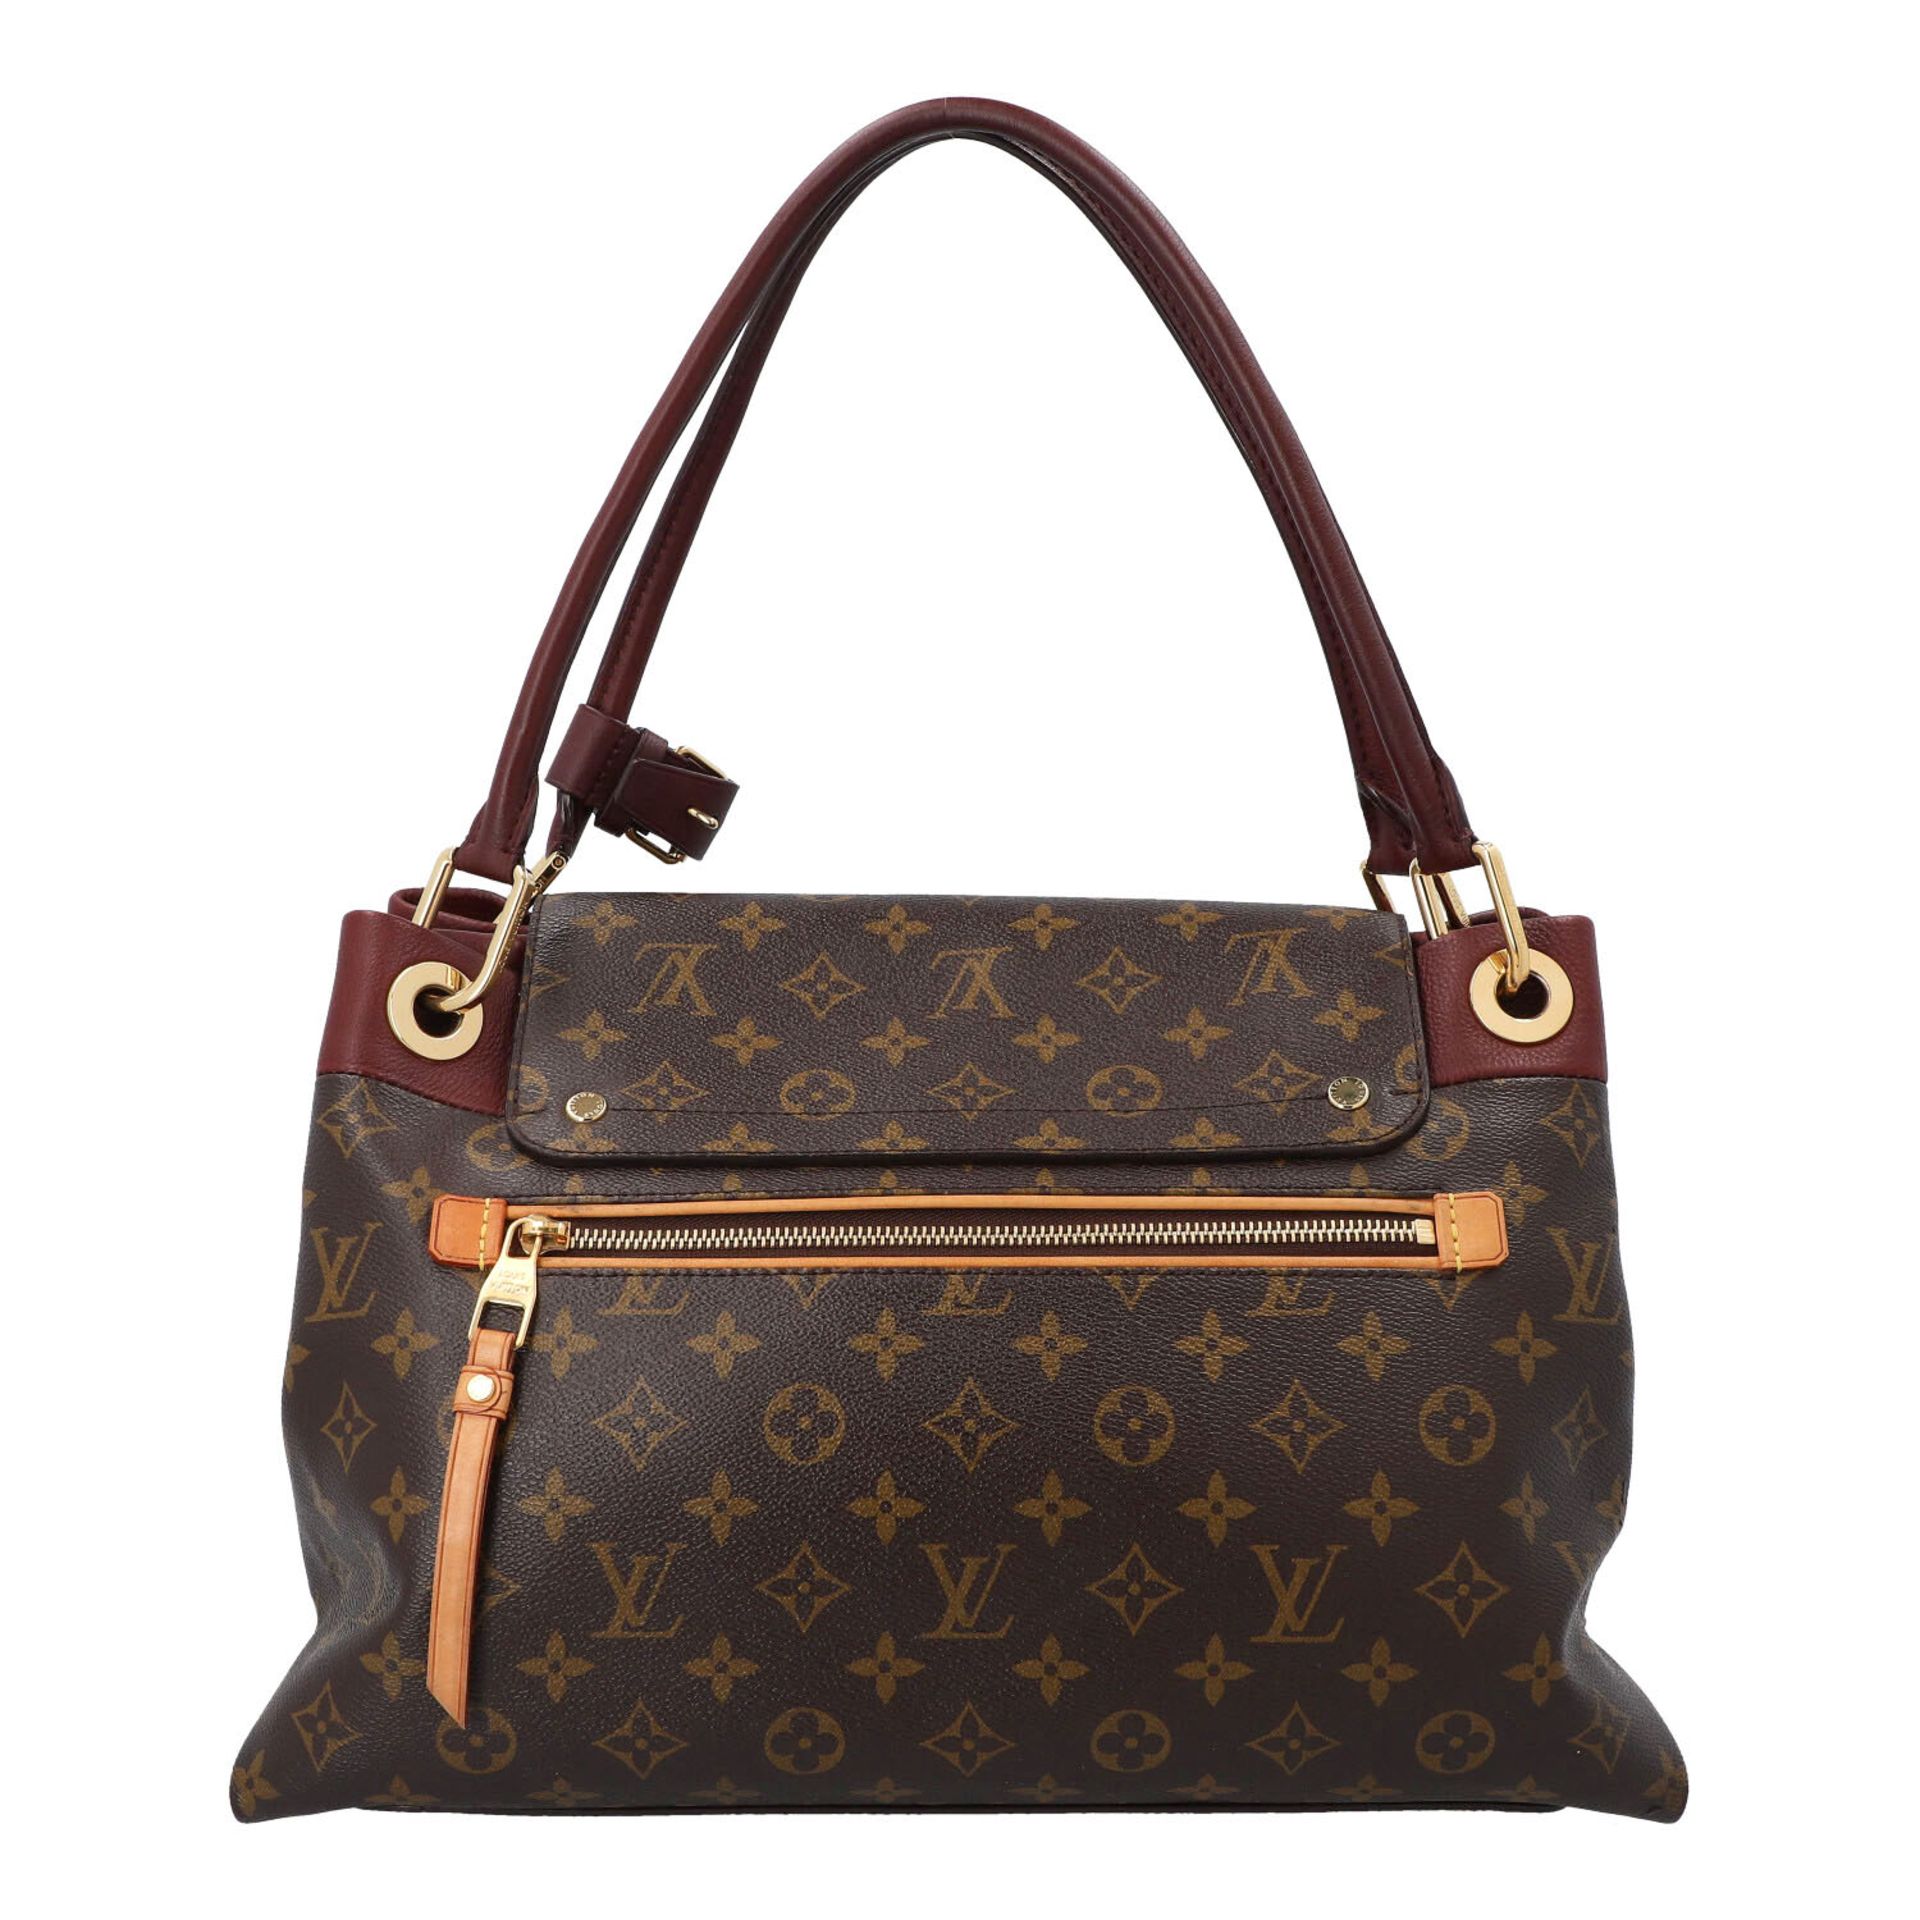 LOUIS VUITTON Schultertasche "OLYMPE", Koll.: 2011. - Image 4 of 8